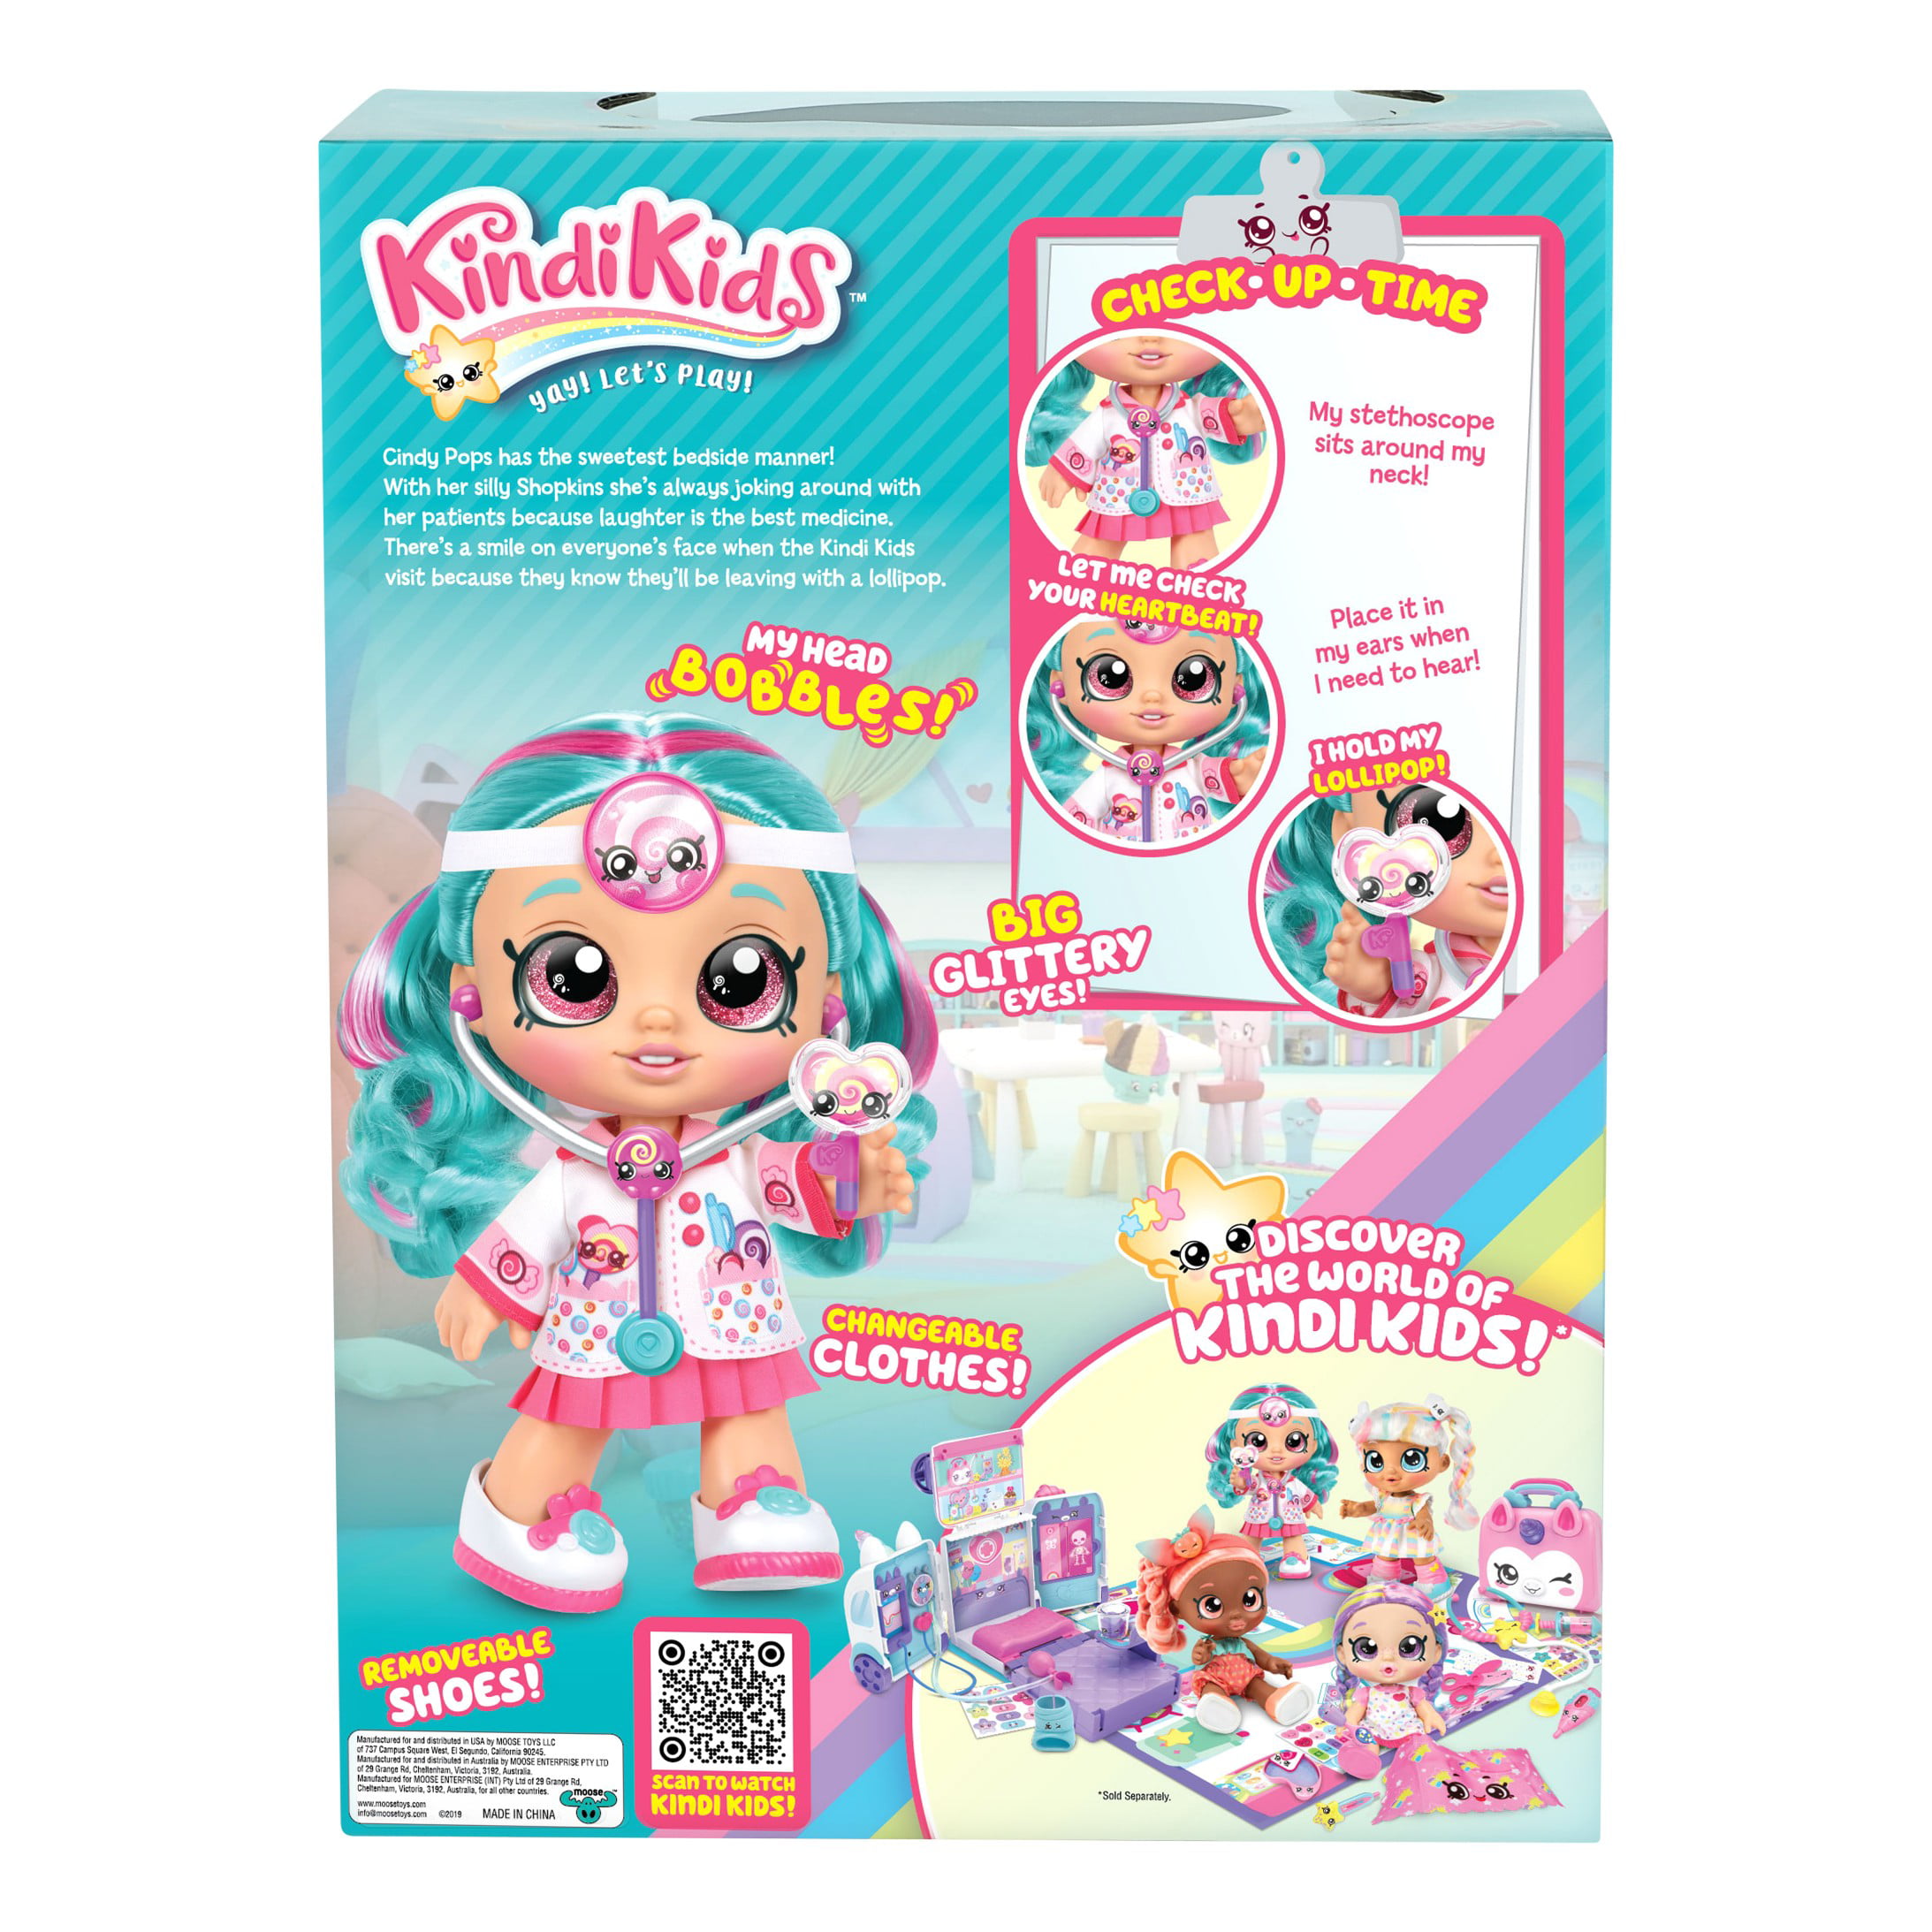 Dr Cindy Pops for sale online Kindi Kids 50036 Fun Time 10 Inch Doll 